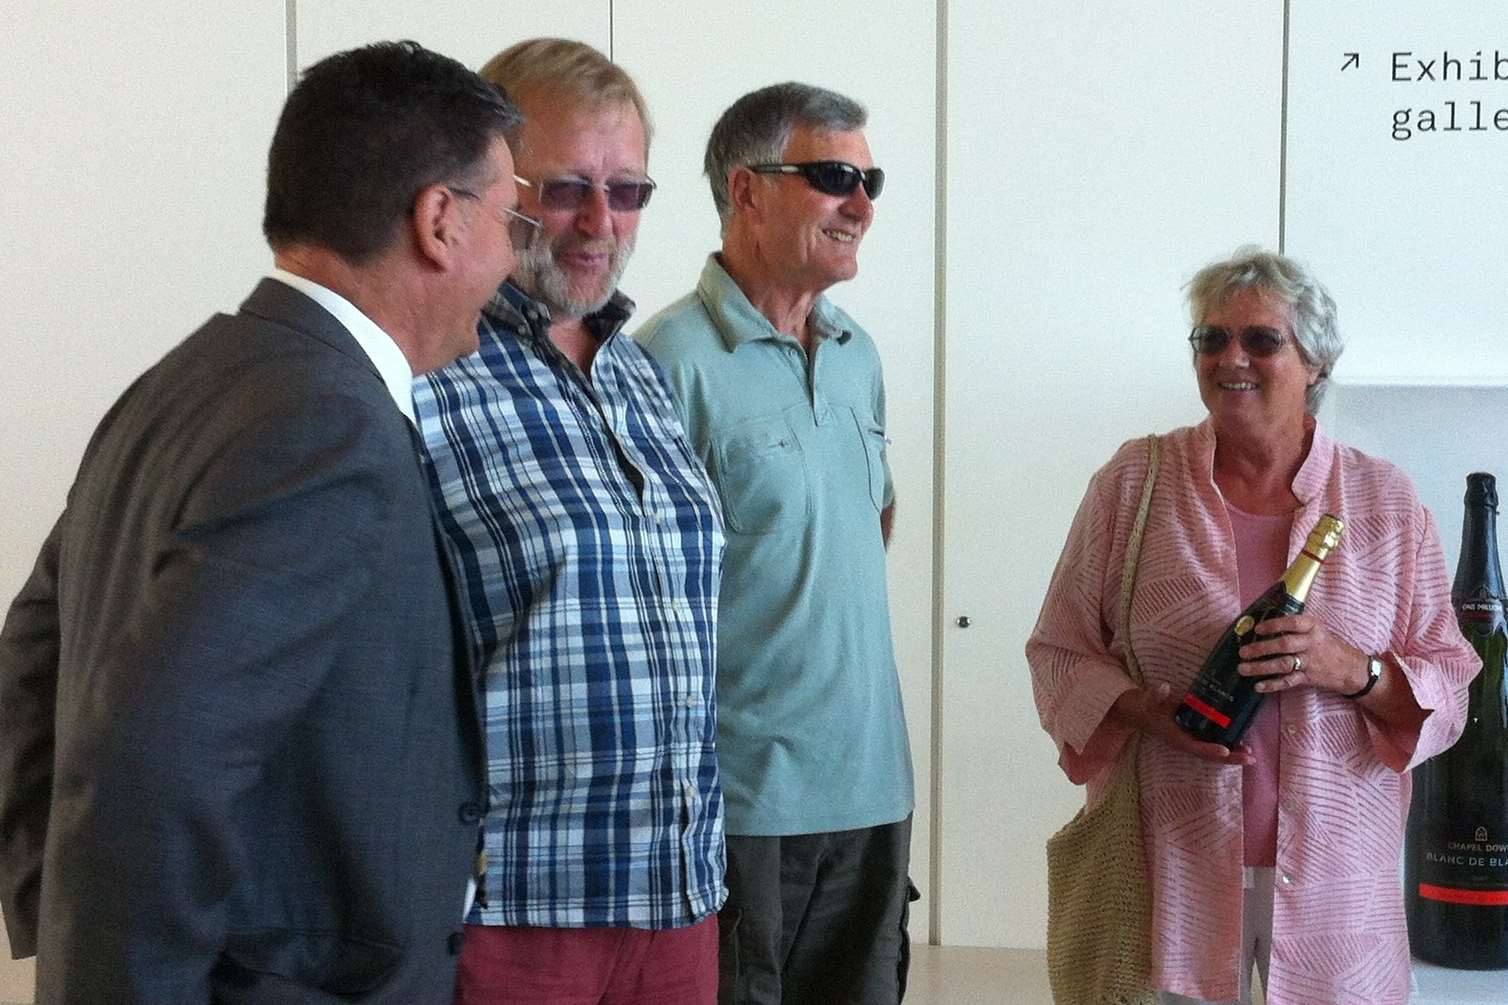 Sue Lewis is presented with her wine as the millionth visitor